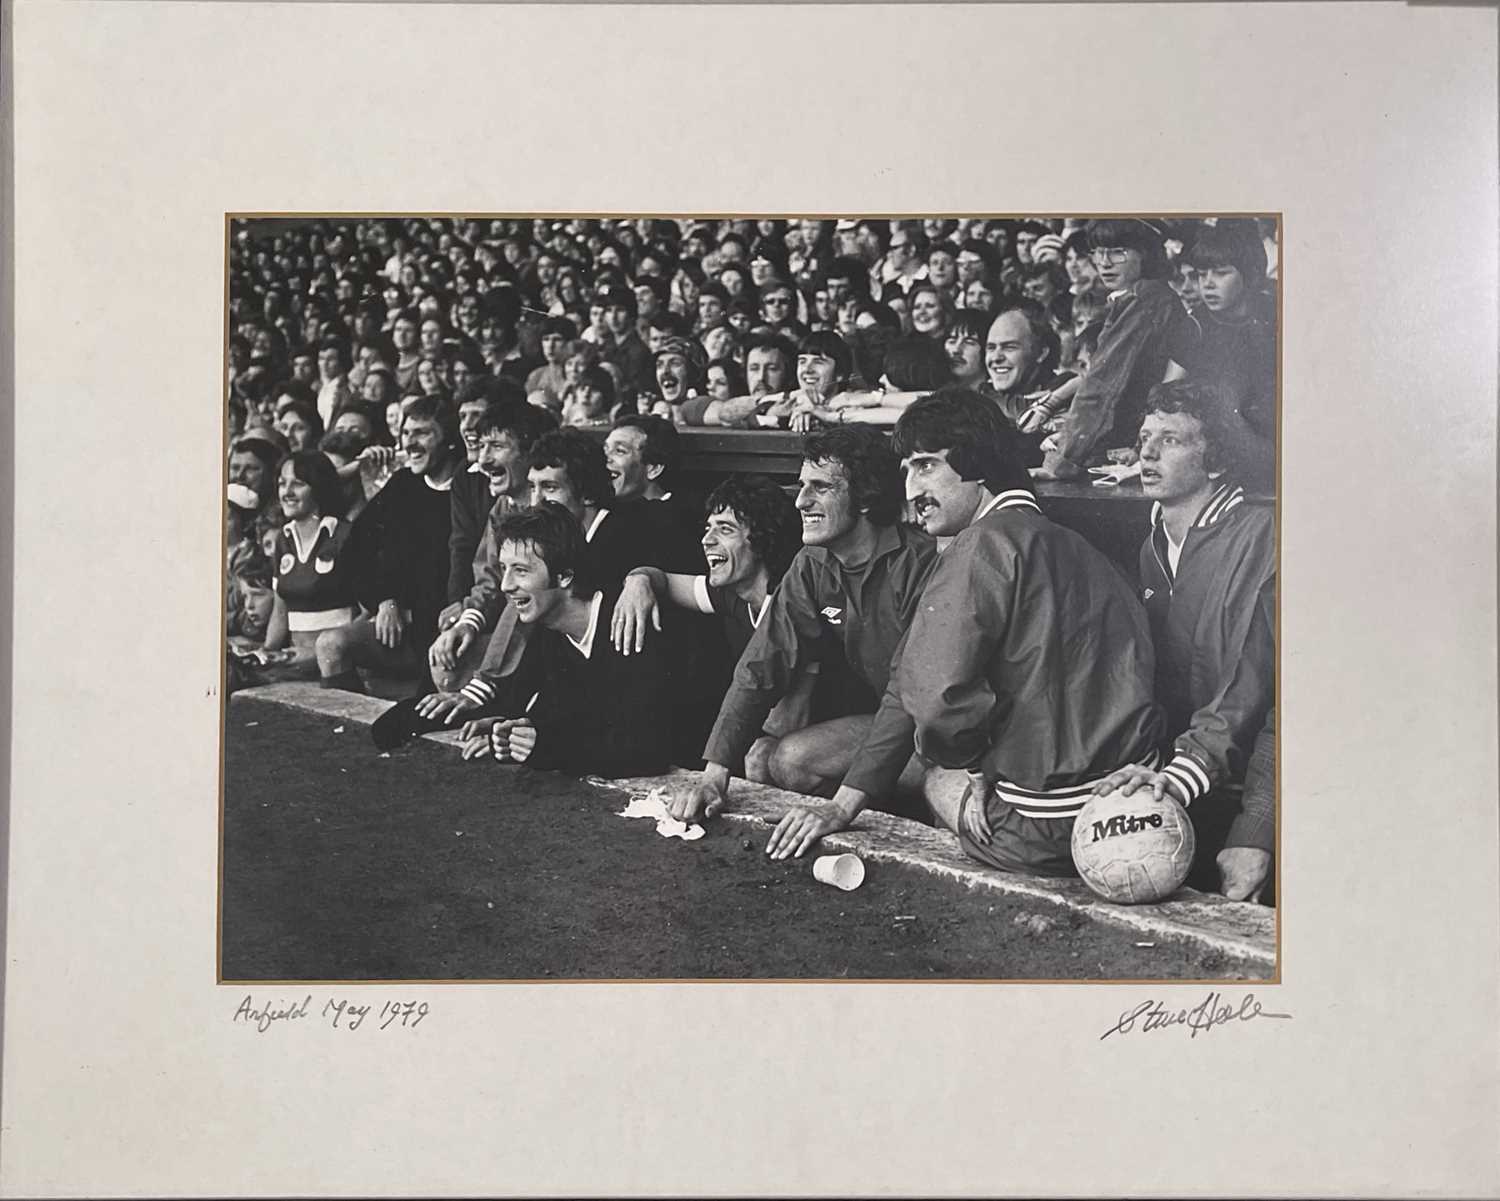 LIVERPOOL FC PRINTS SIGNED BY PHOTOGRAPHER. - Image 2 of 3